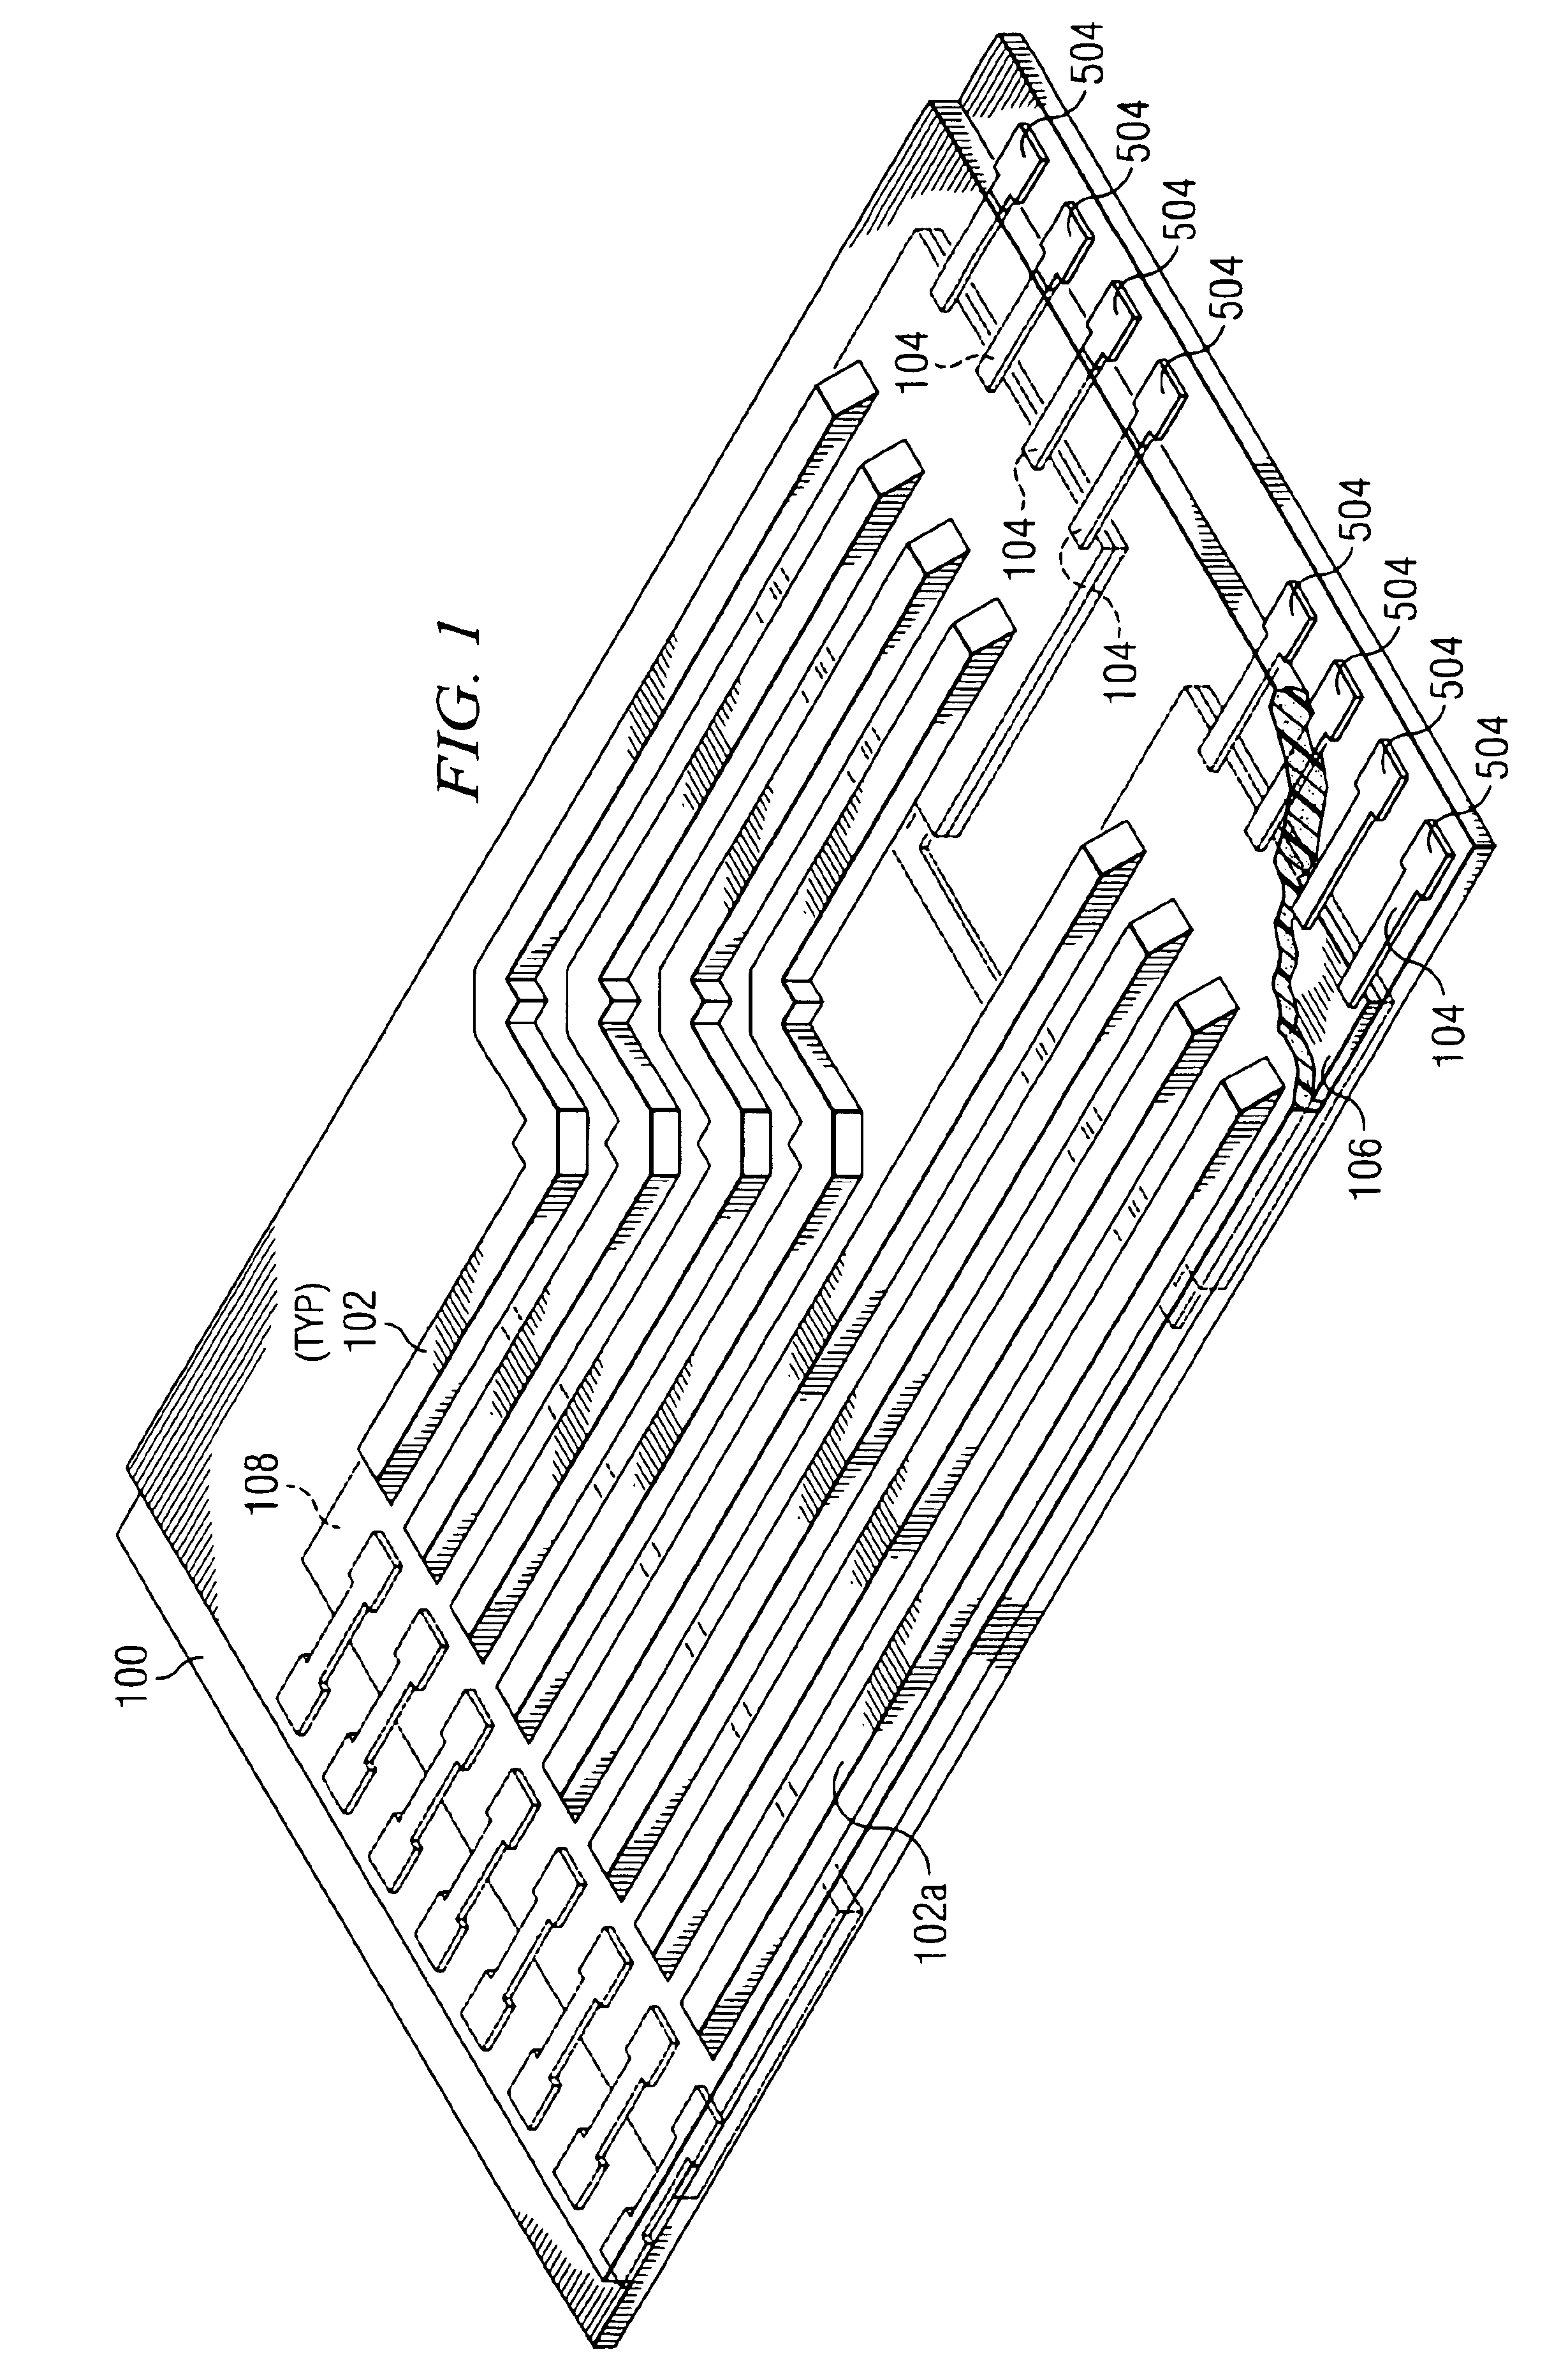 Method for forming an optical printed circuit board